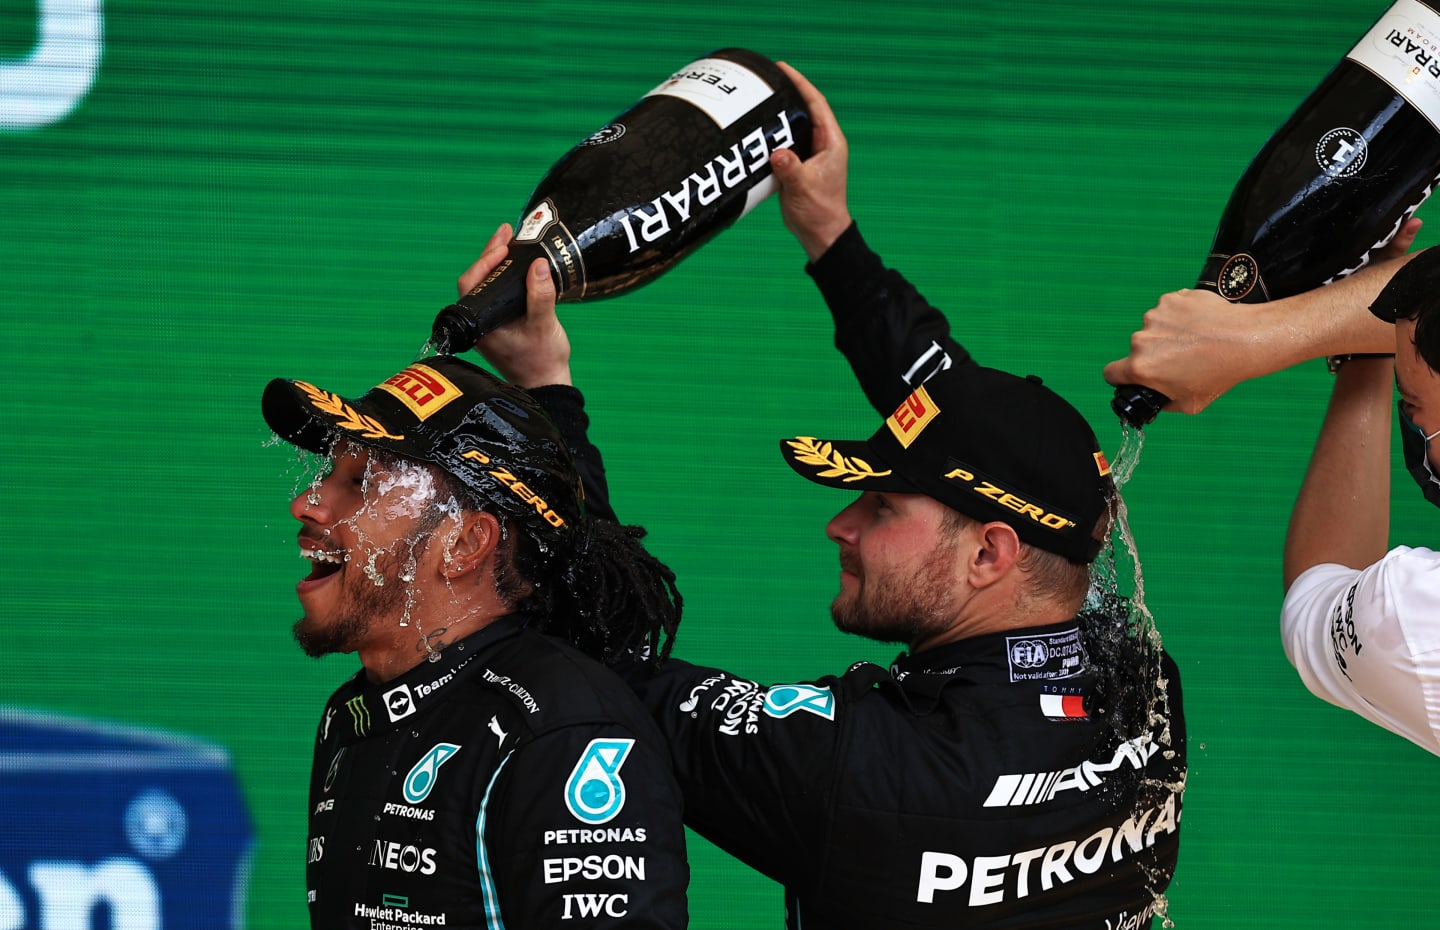 SAO PAULO, BRAZIL - NOVEMBER 14: Race winner Lewis Hamilton of Great Britain and Mercedes GP and